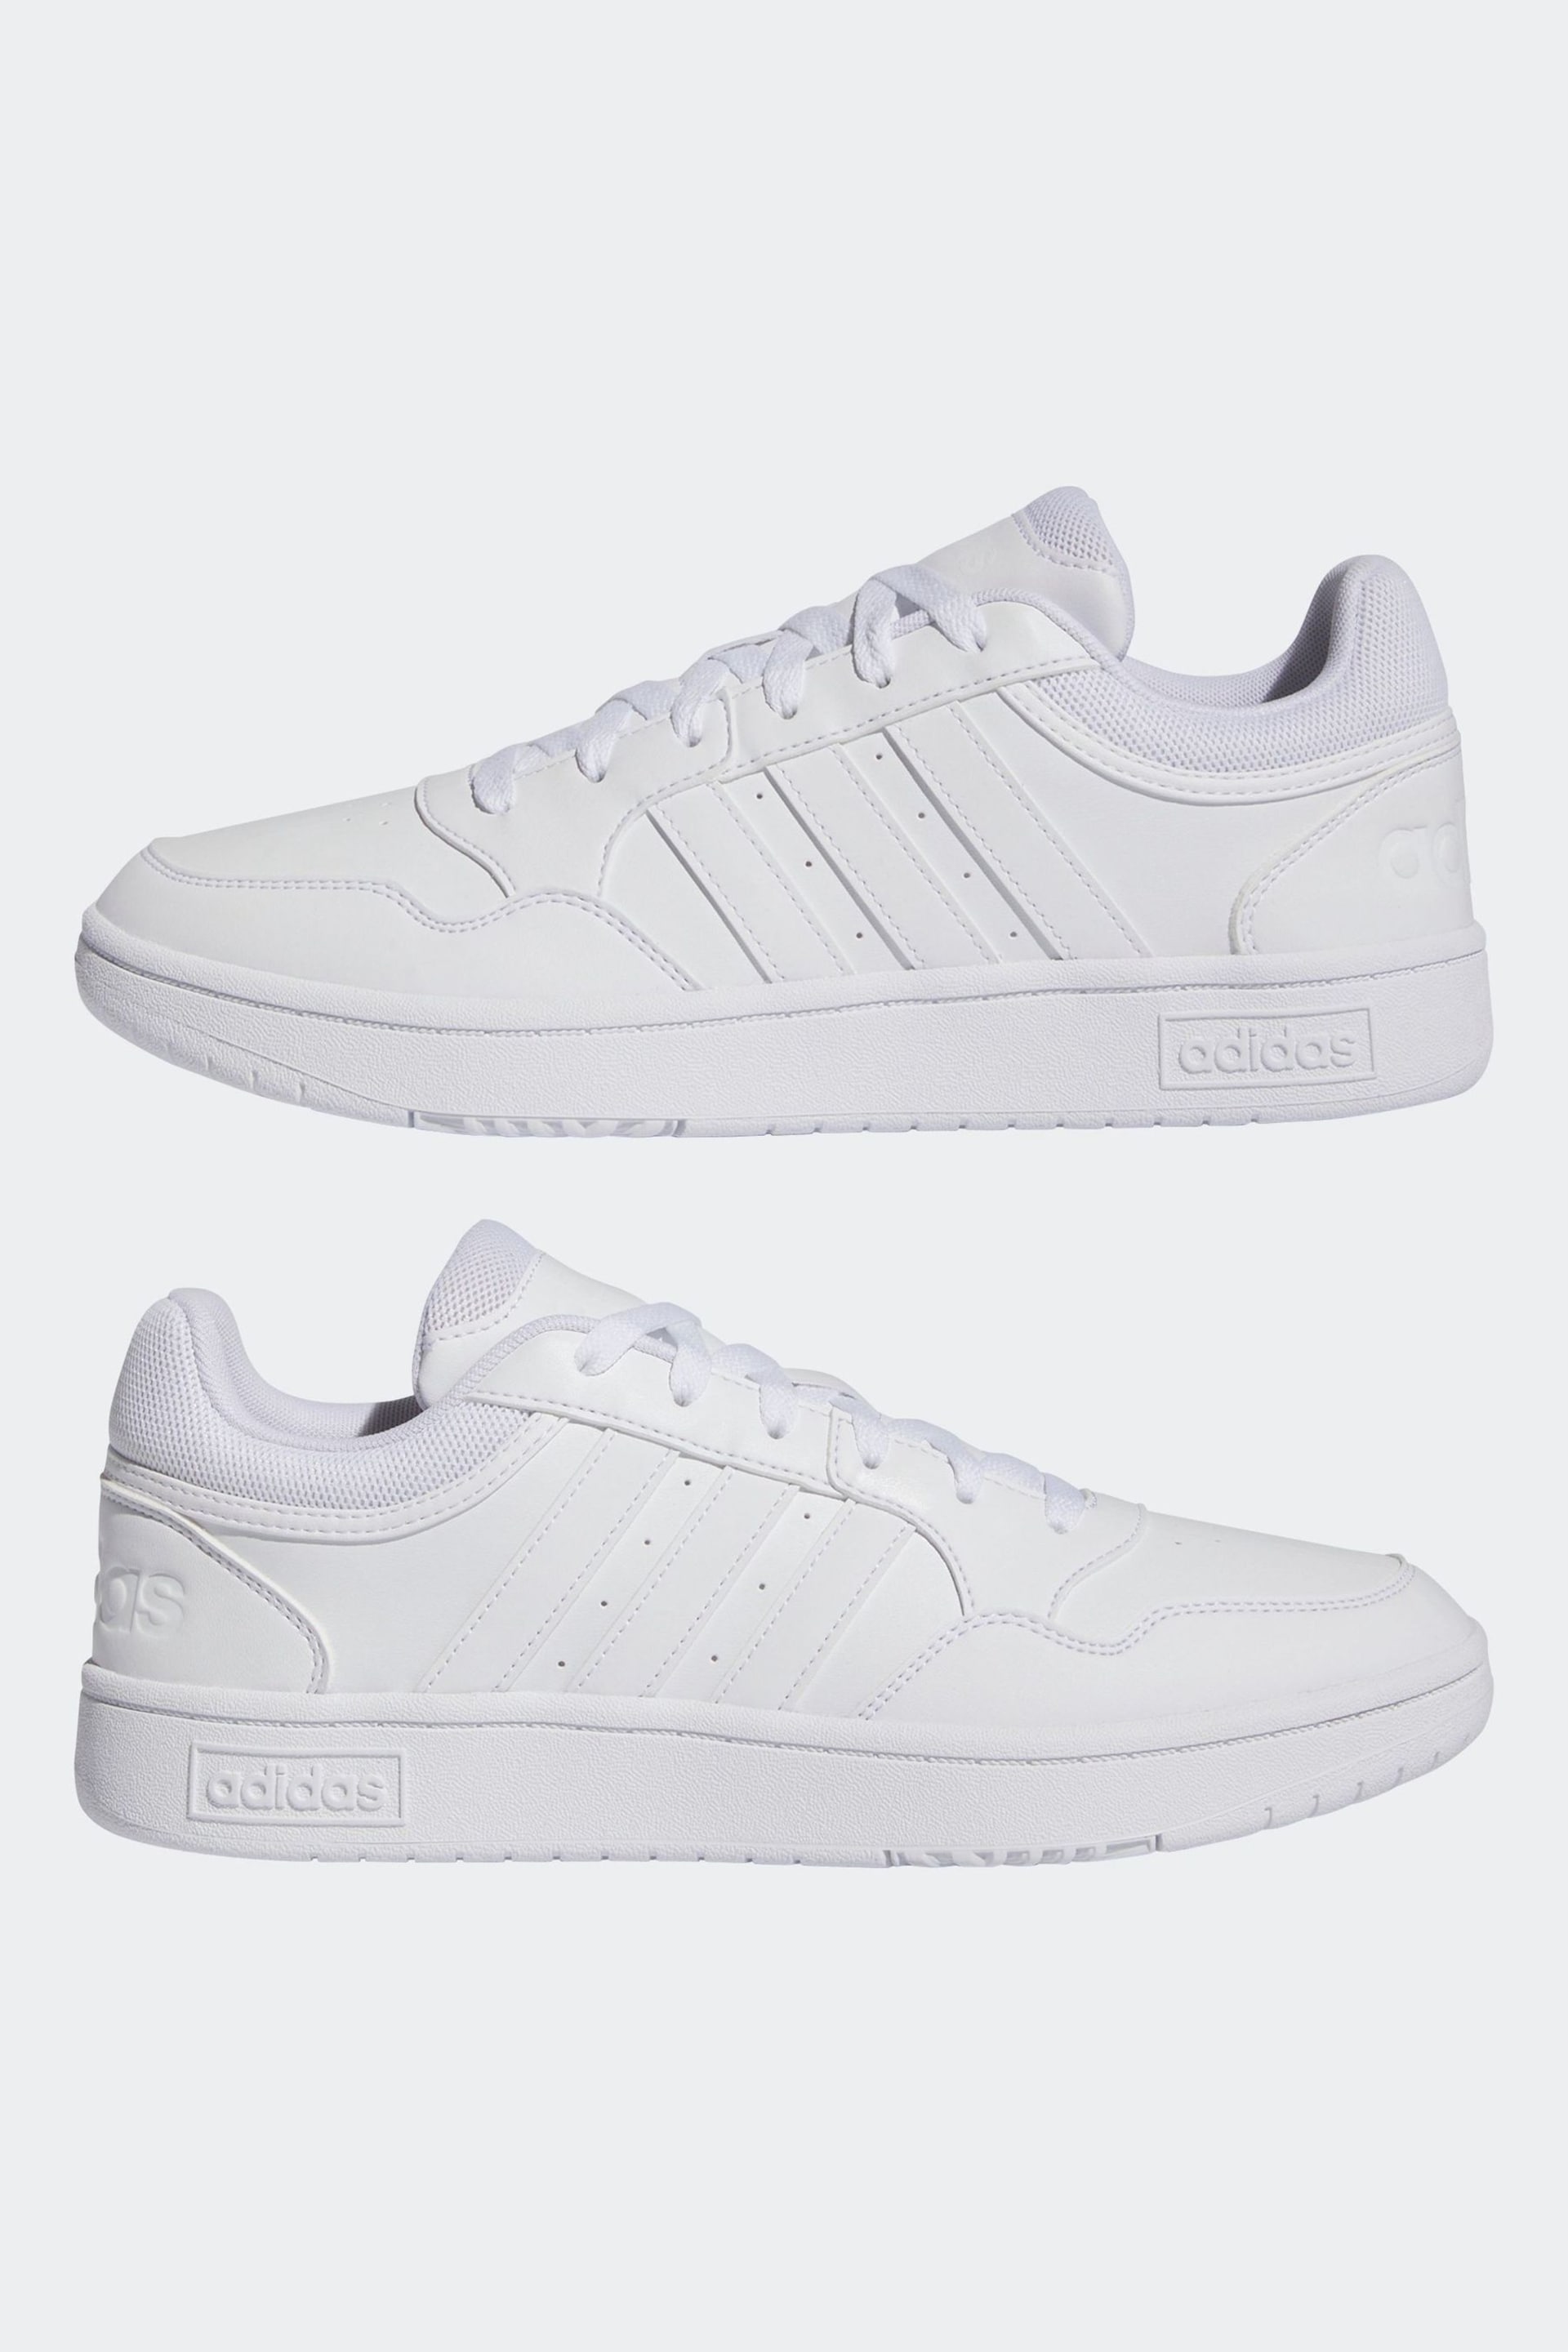 adidas White Originals Hoops 3.0 Low Classic Vintage Trainers - Image 5 of 9